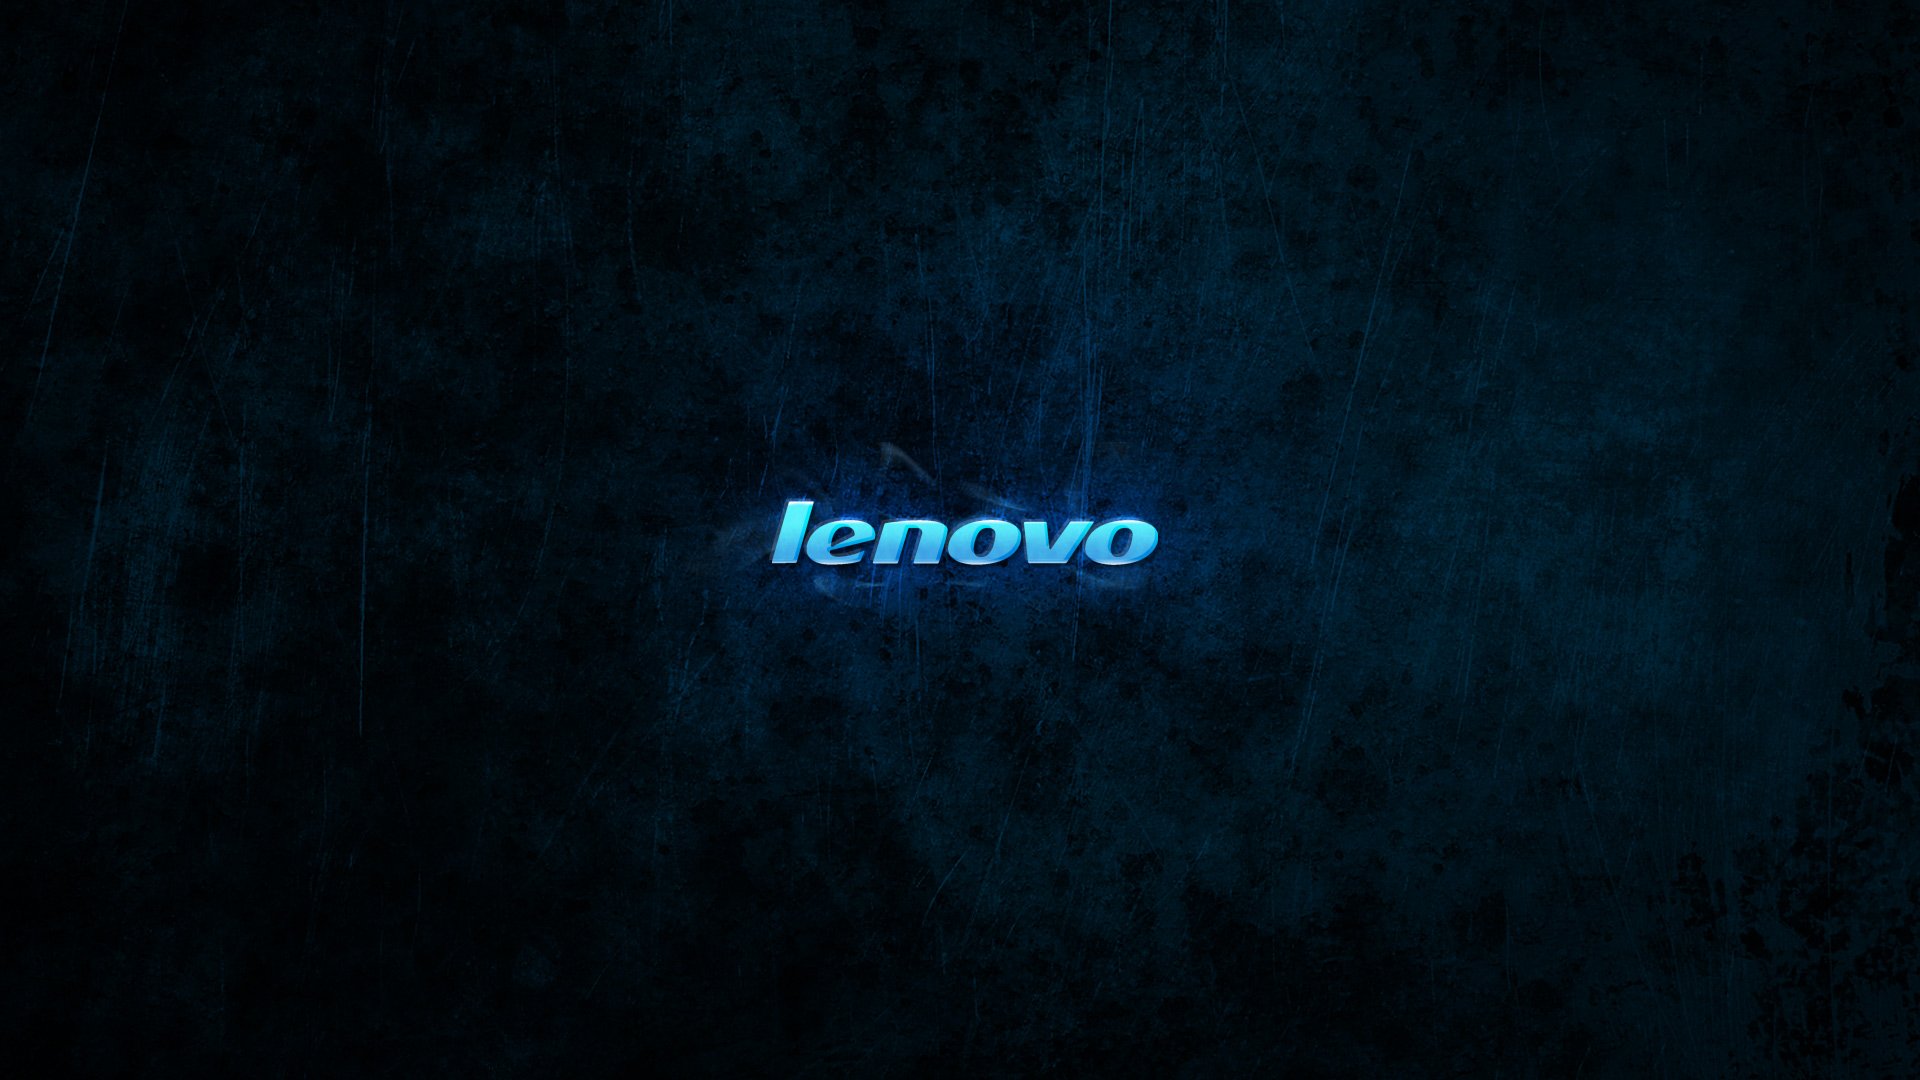 Download Lenovo Windows 8 Wallpapers pictures in high definition or